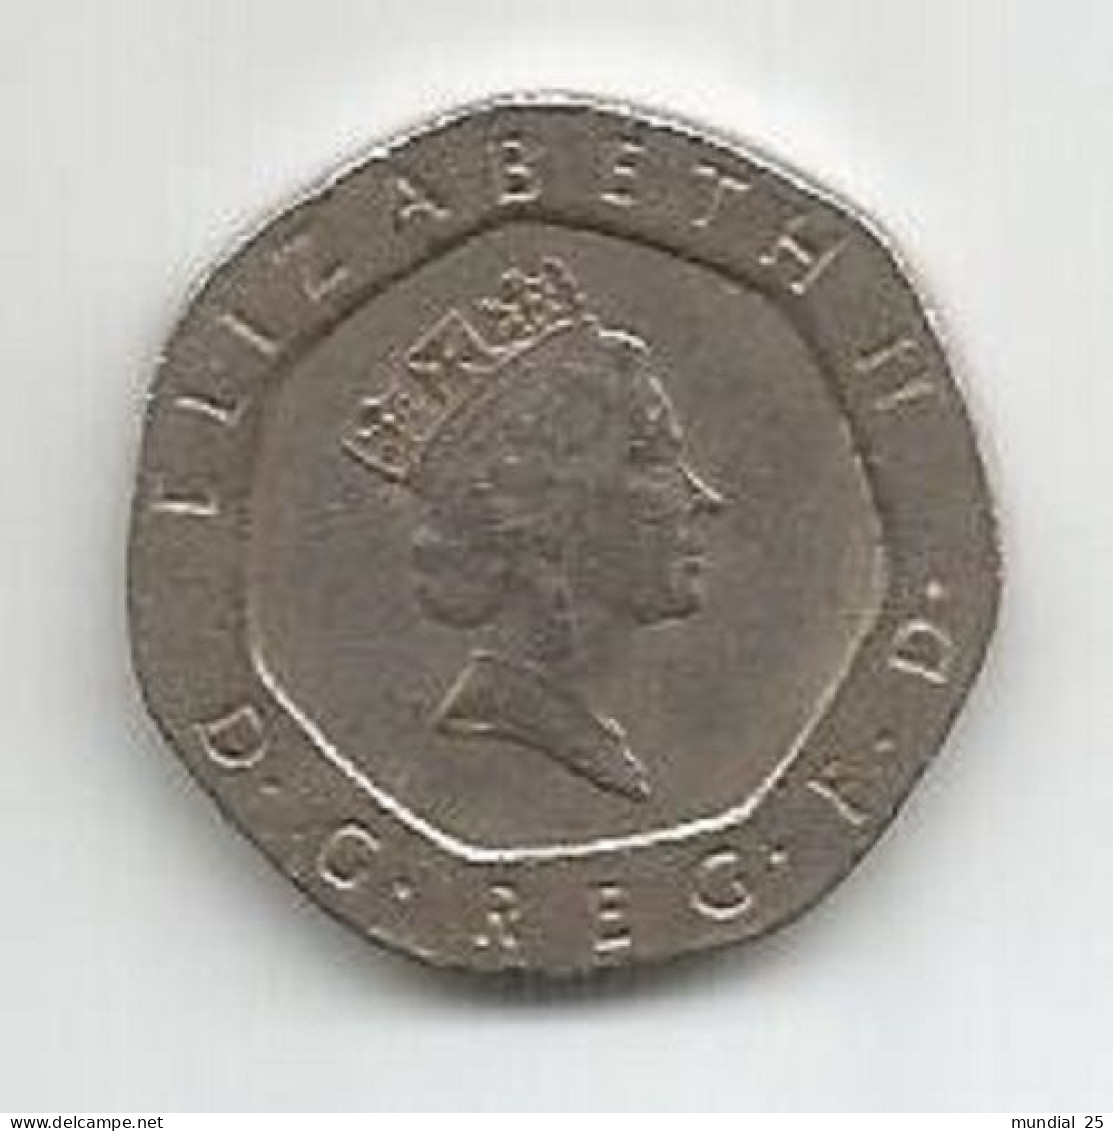 GREAT BRITAIN 20 PENCE 1990 - 20 Pence